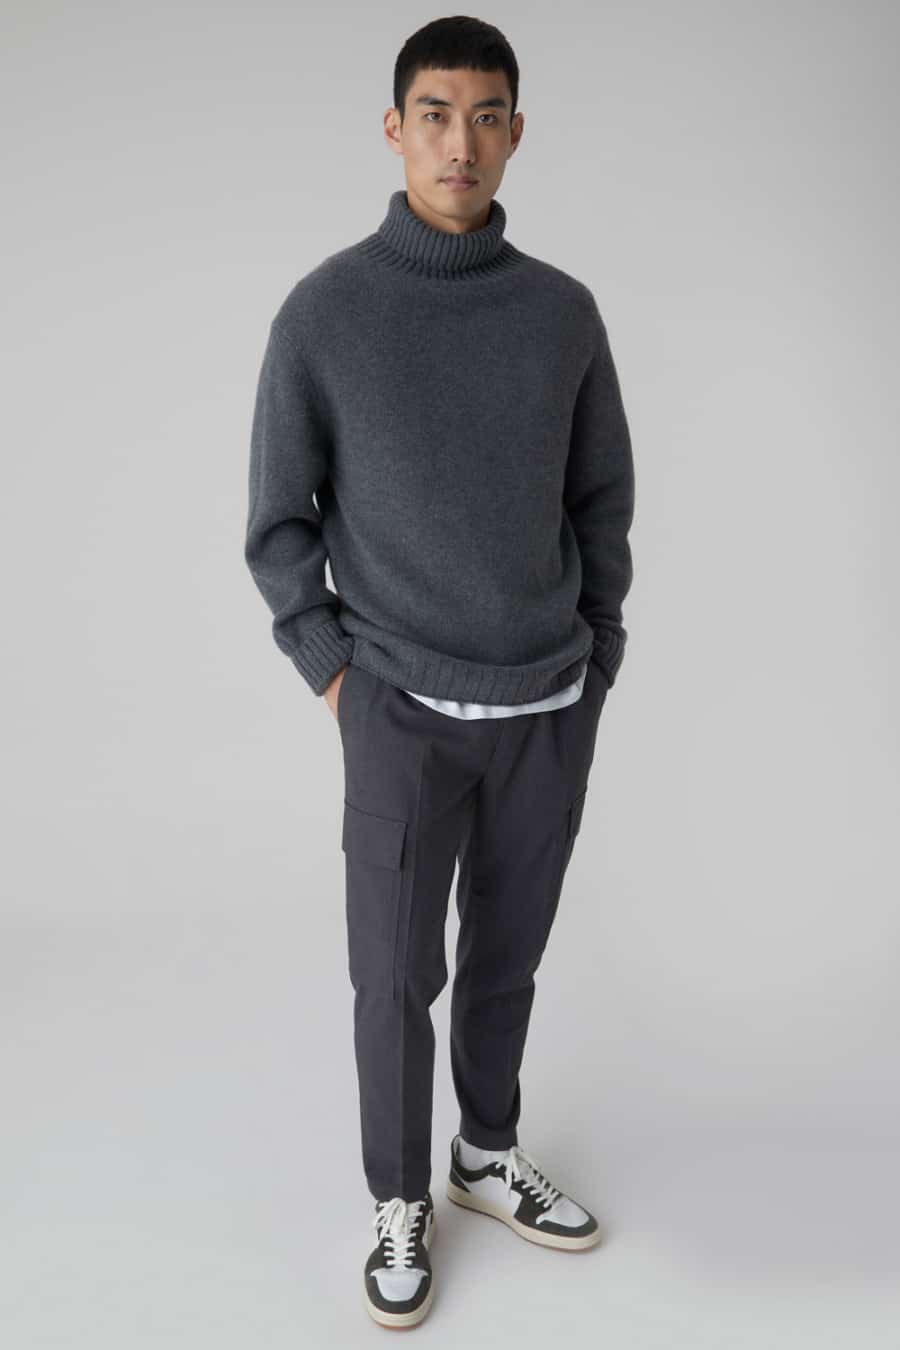 Men's grey wool cargo pants, chunky grey roll neck and running sneakers outfit